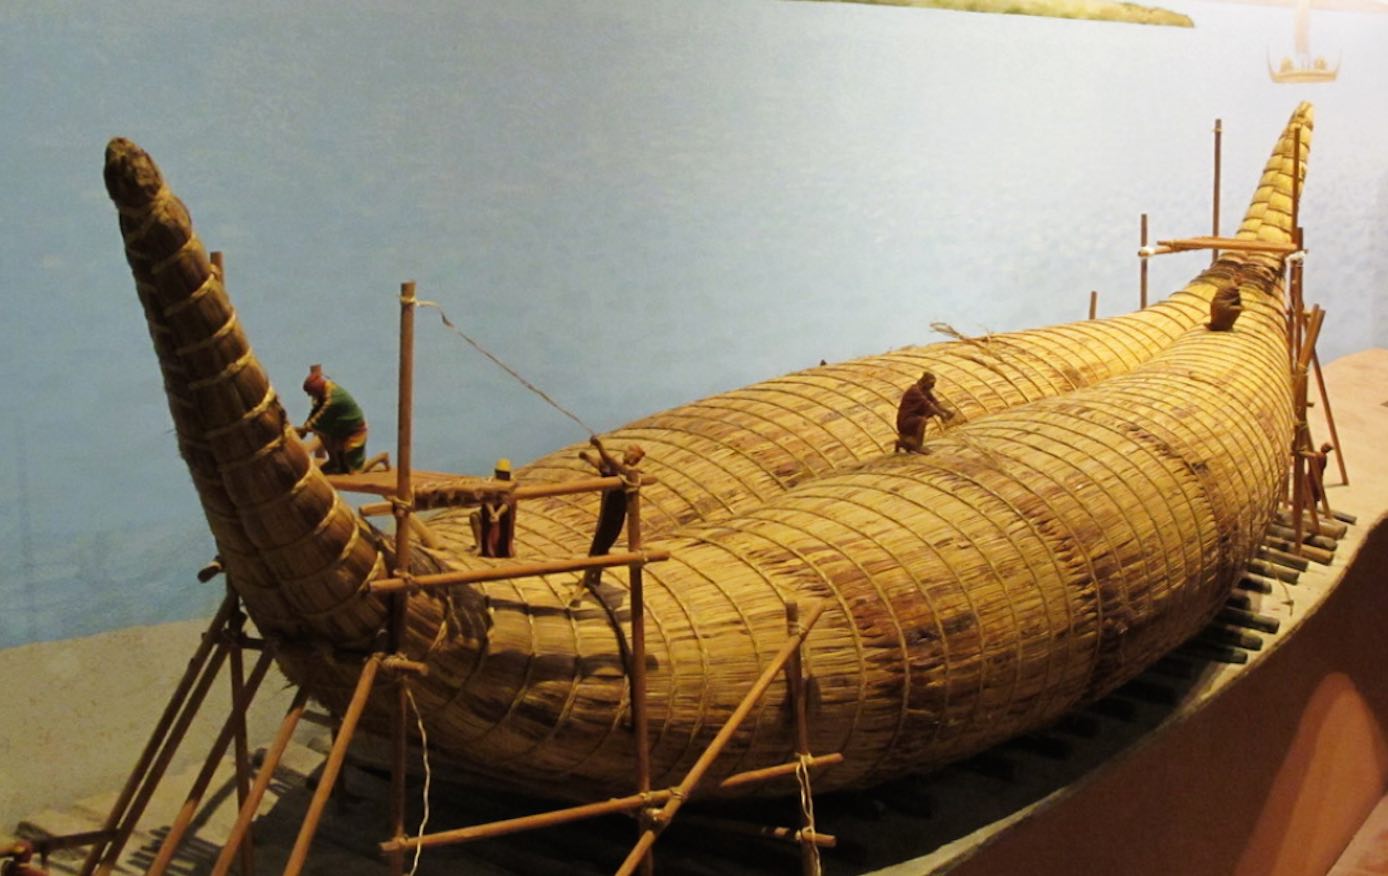 papyrus reed boats